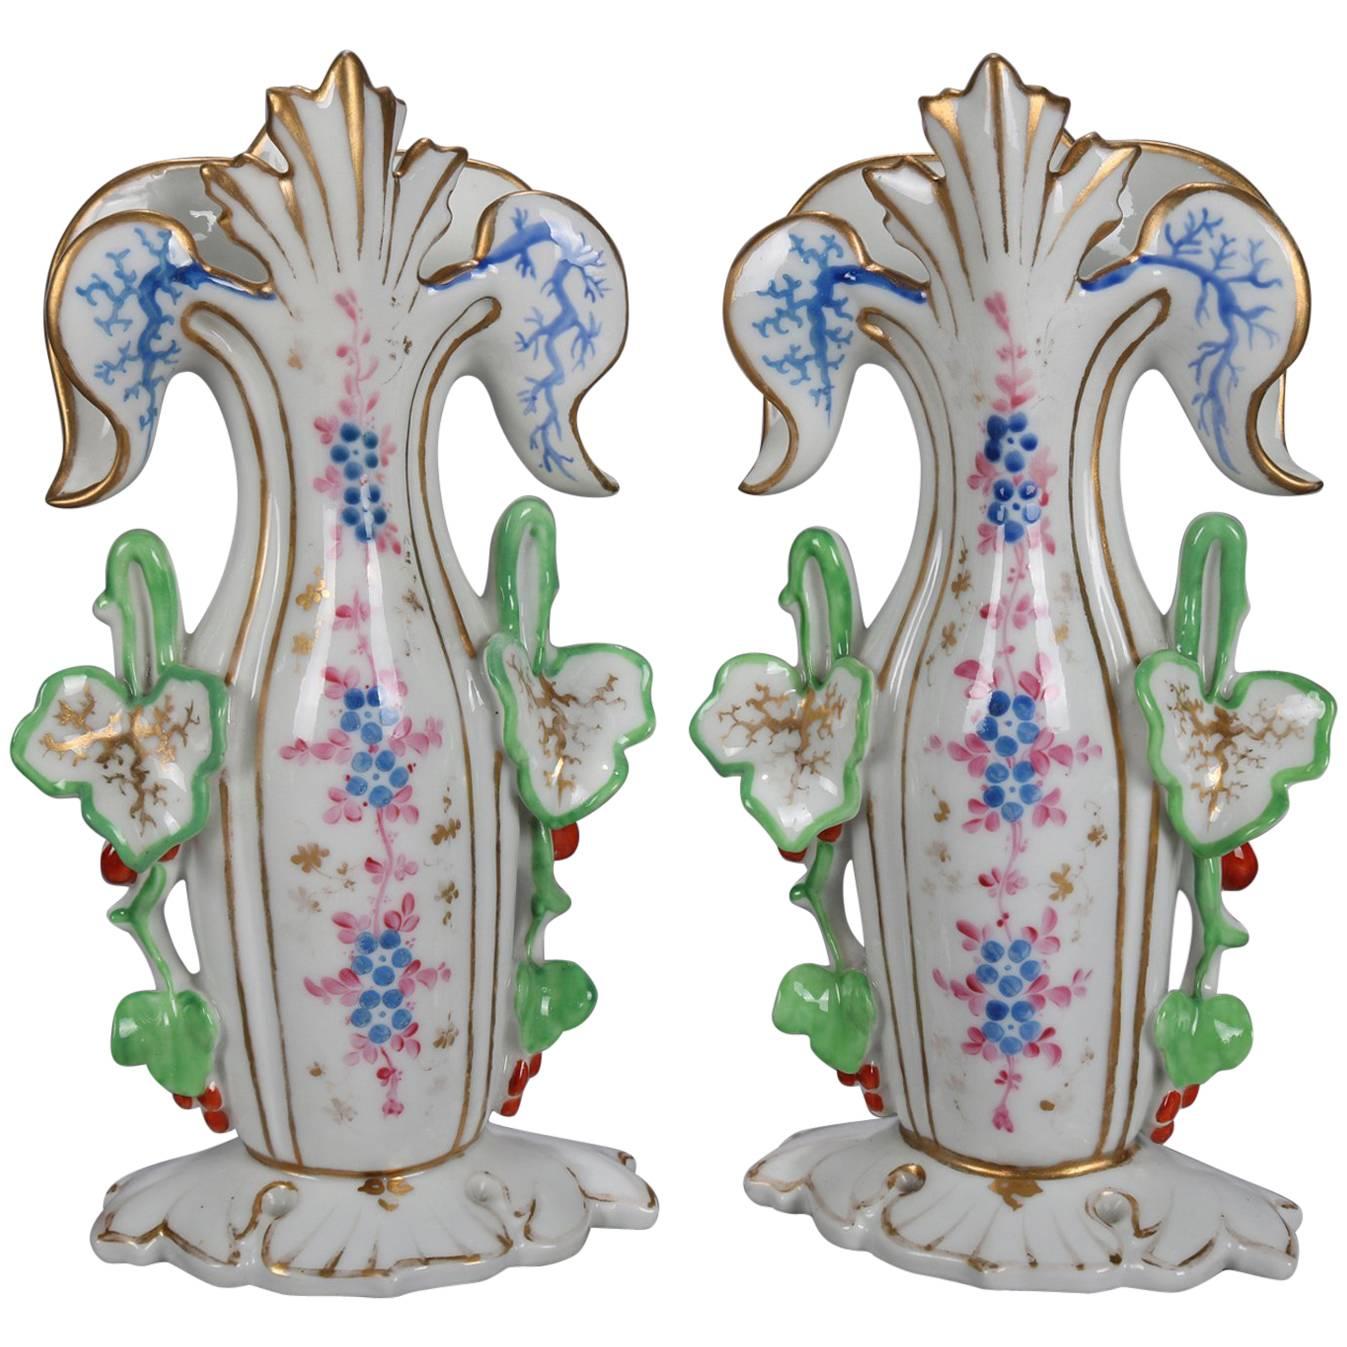 Pair of Old Paris Hand-Painted and Gilt Floral Form Porcelain Spill Vases